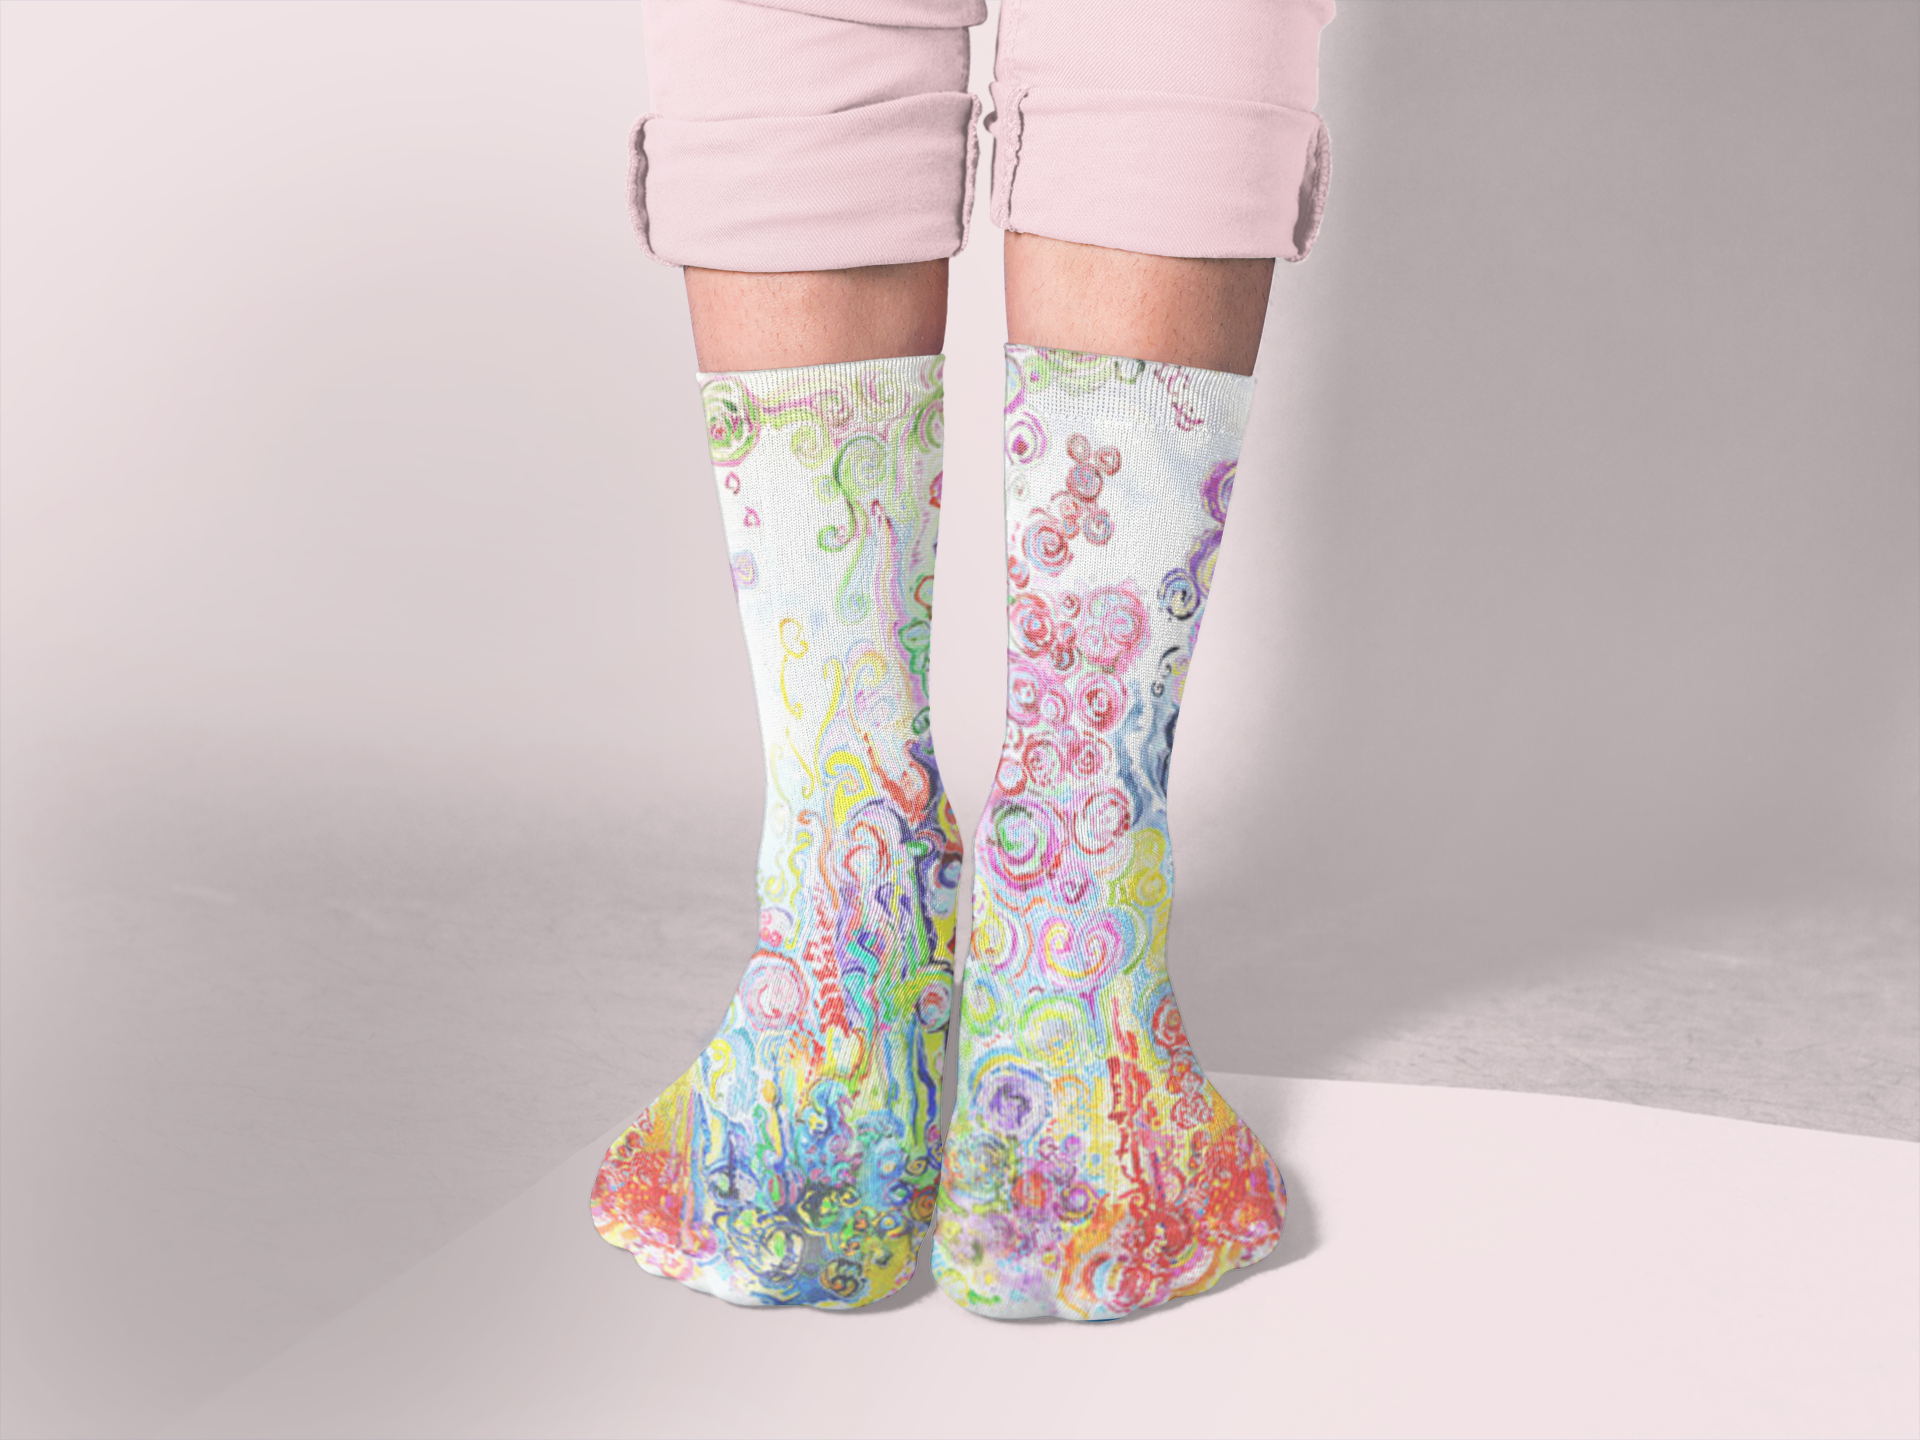 man-wearing-socks-template-while-standing-on-a-multicolor-surface-a15598-5.png